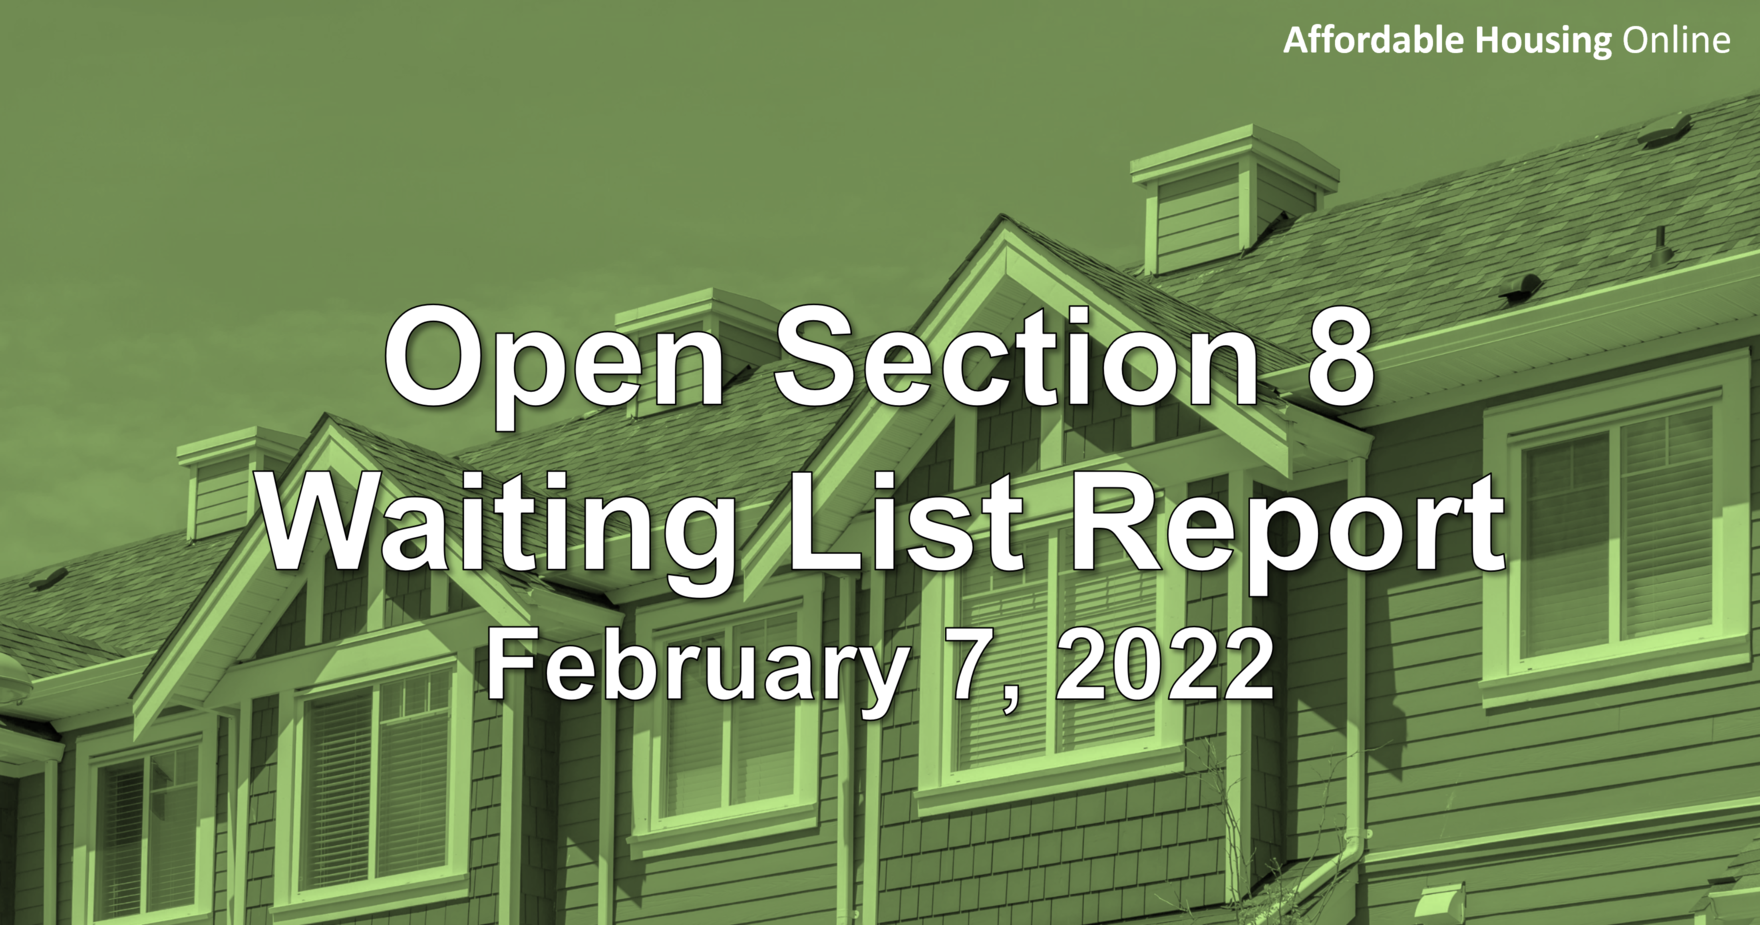 Open Section 8 Waiting List Report February 7, 2022 Affordable